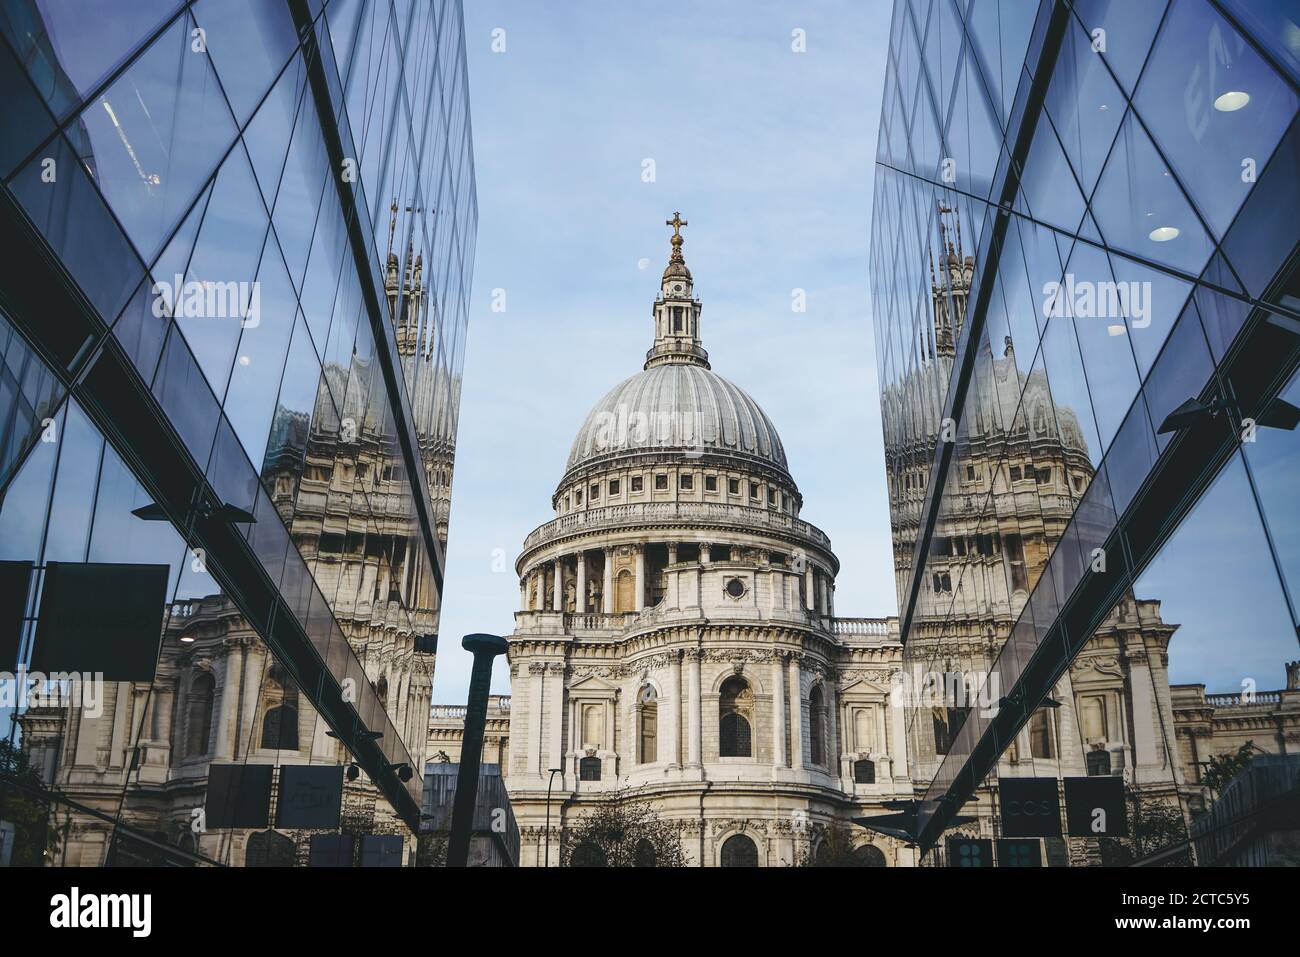 Saint Paul Cathedral reflected in modern glass walls of One New Change mall in City of London, England Stock Photo